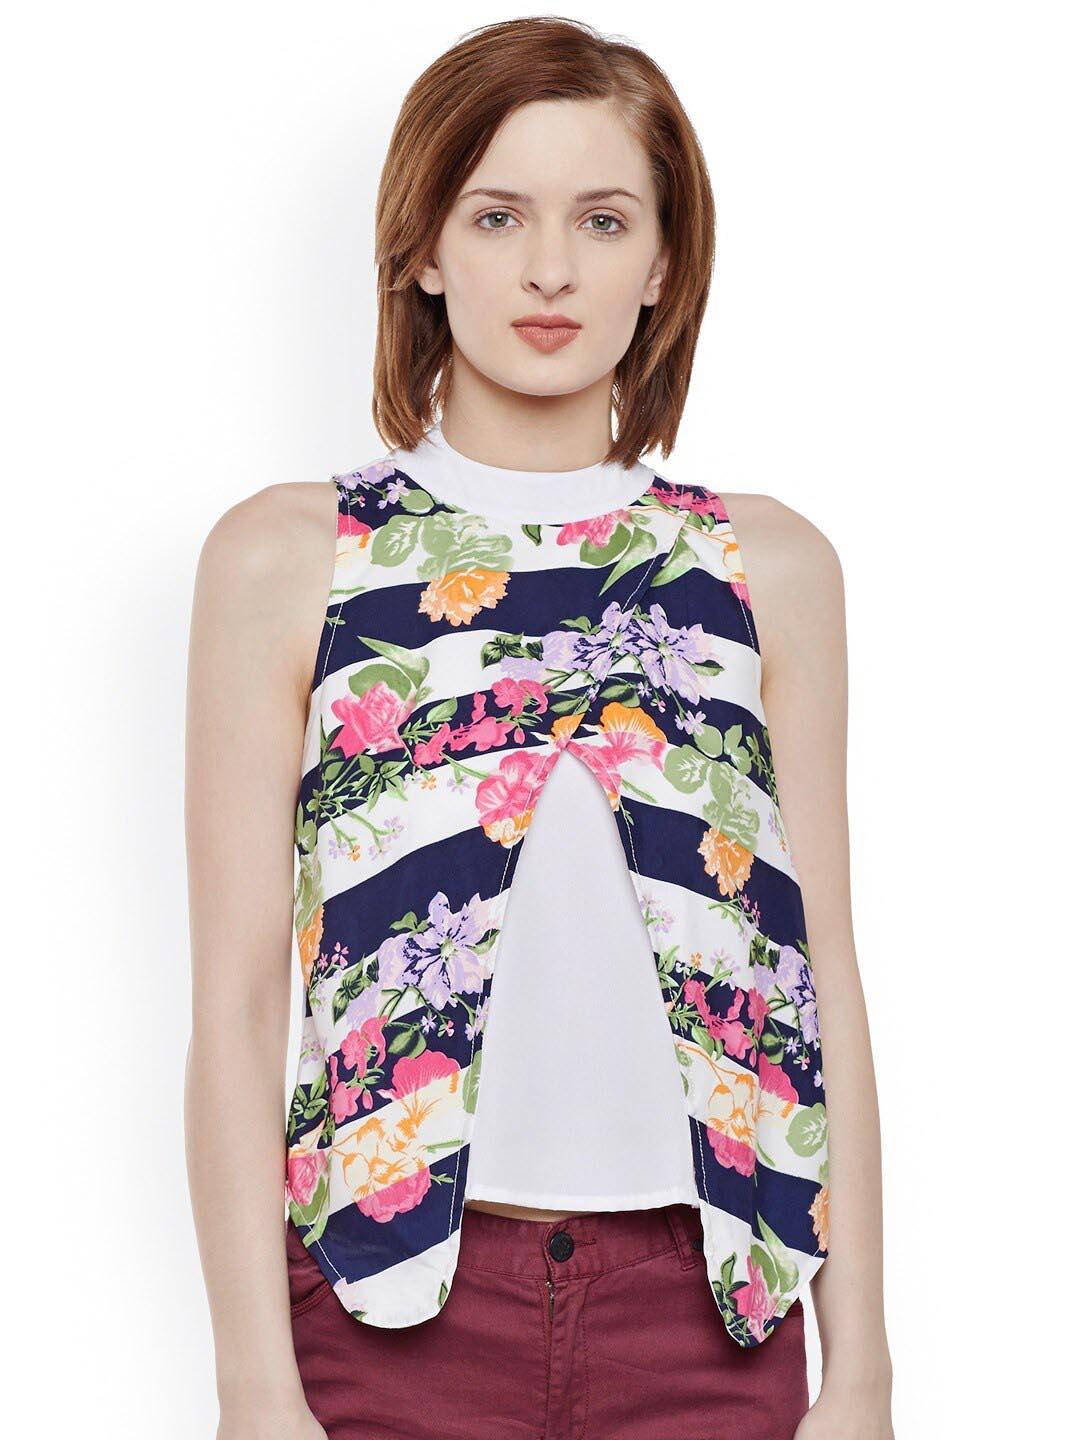 BAESD Floral Printed High Neck Sleeveless Top